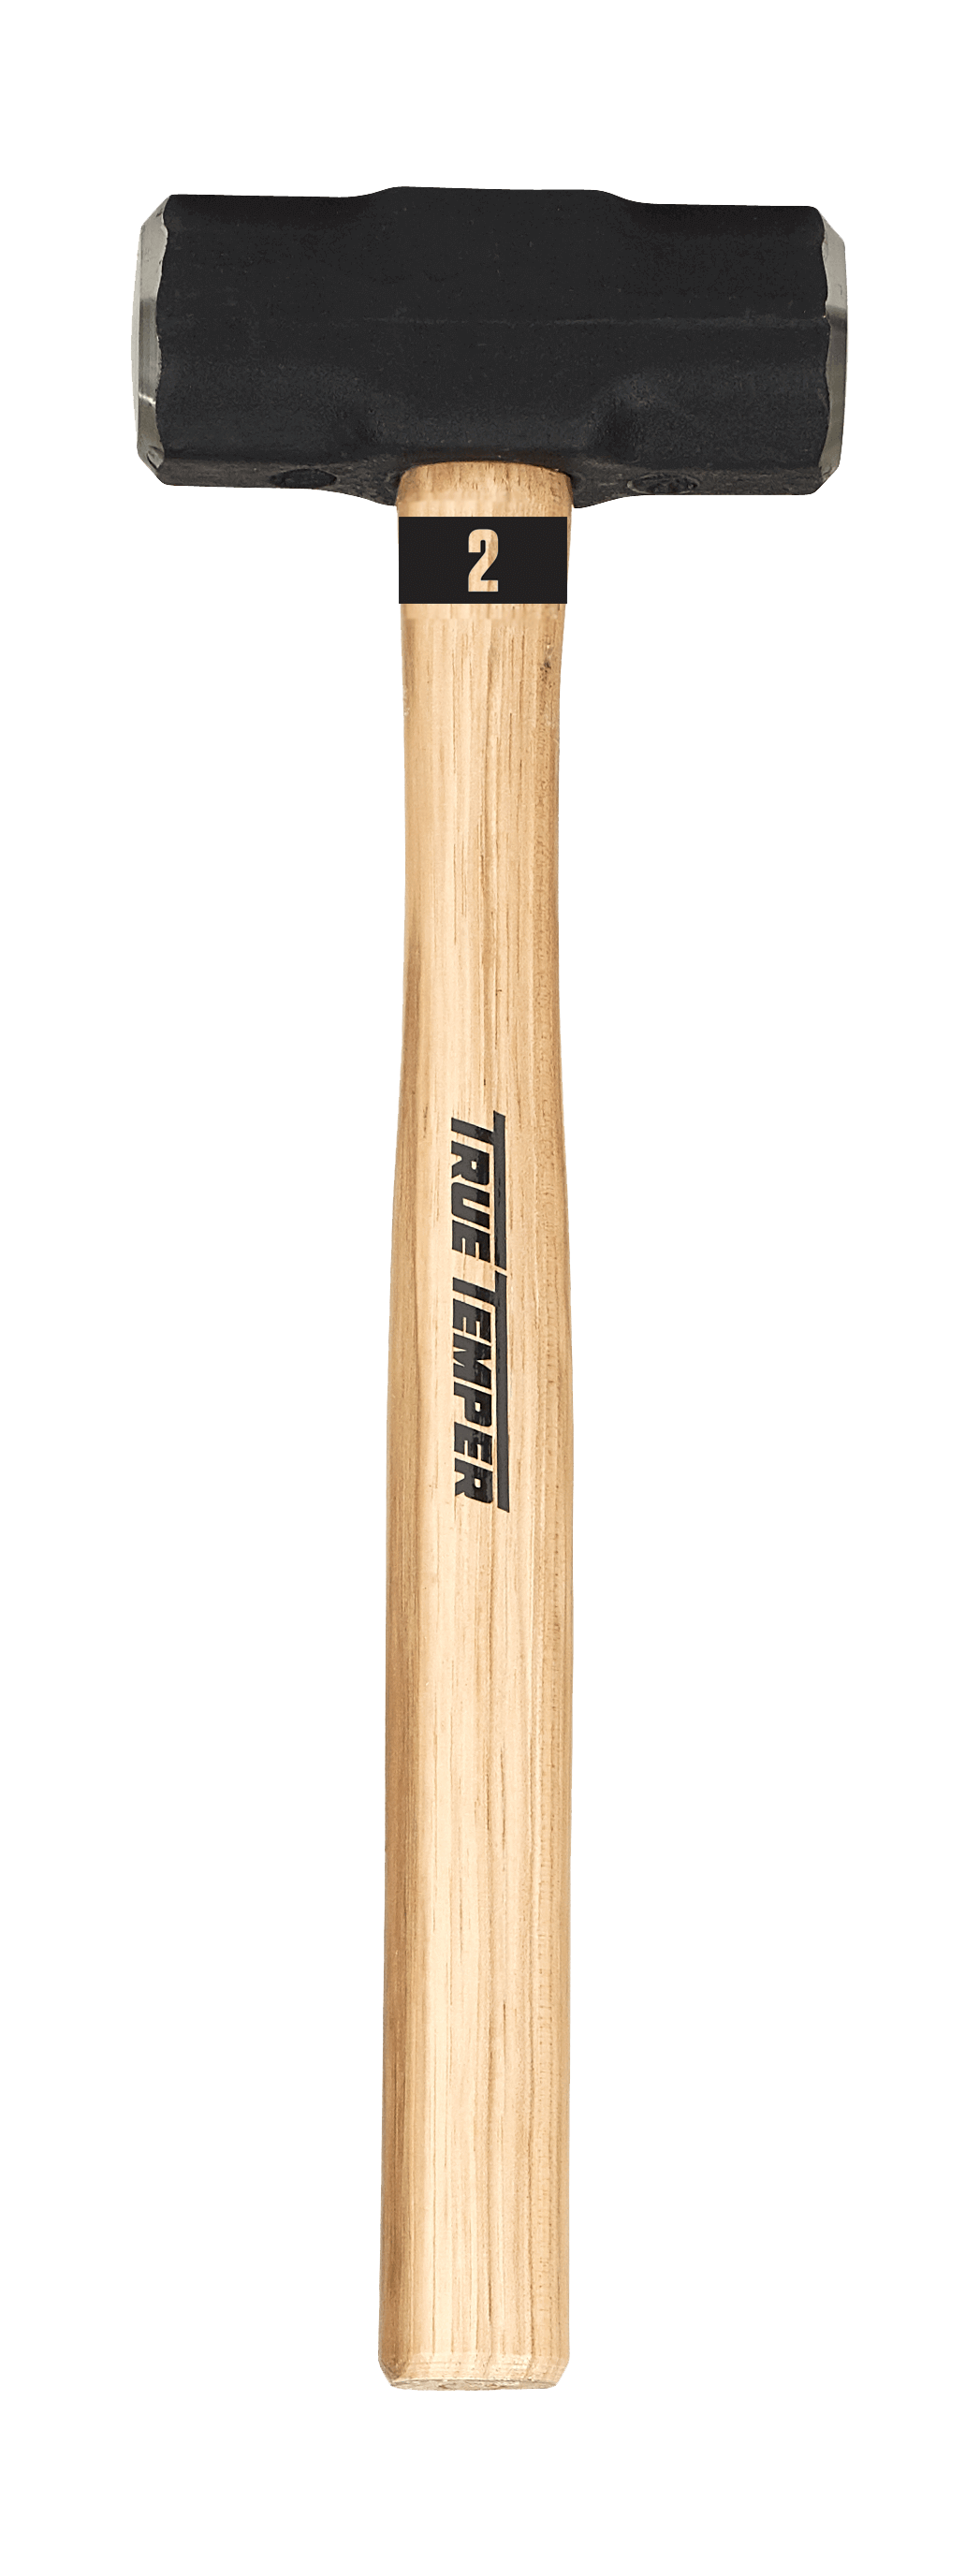 Ames True Temper 2lb Double Face Sledge Hammer w/ Hickory Handle 20184100